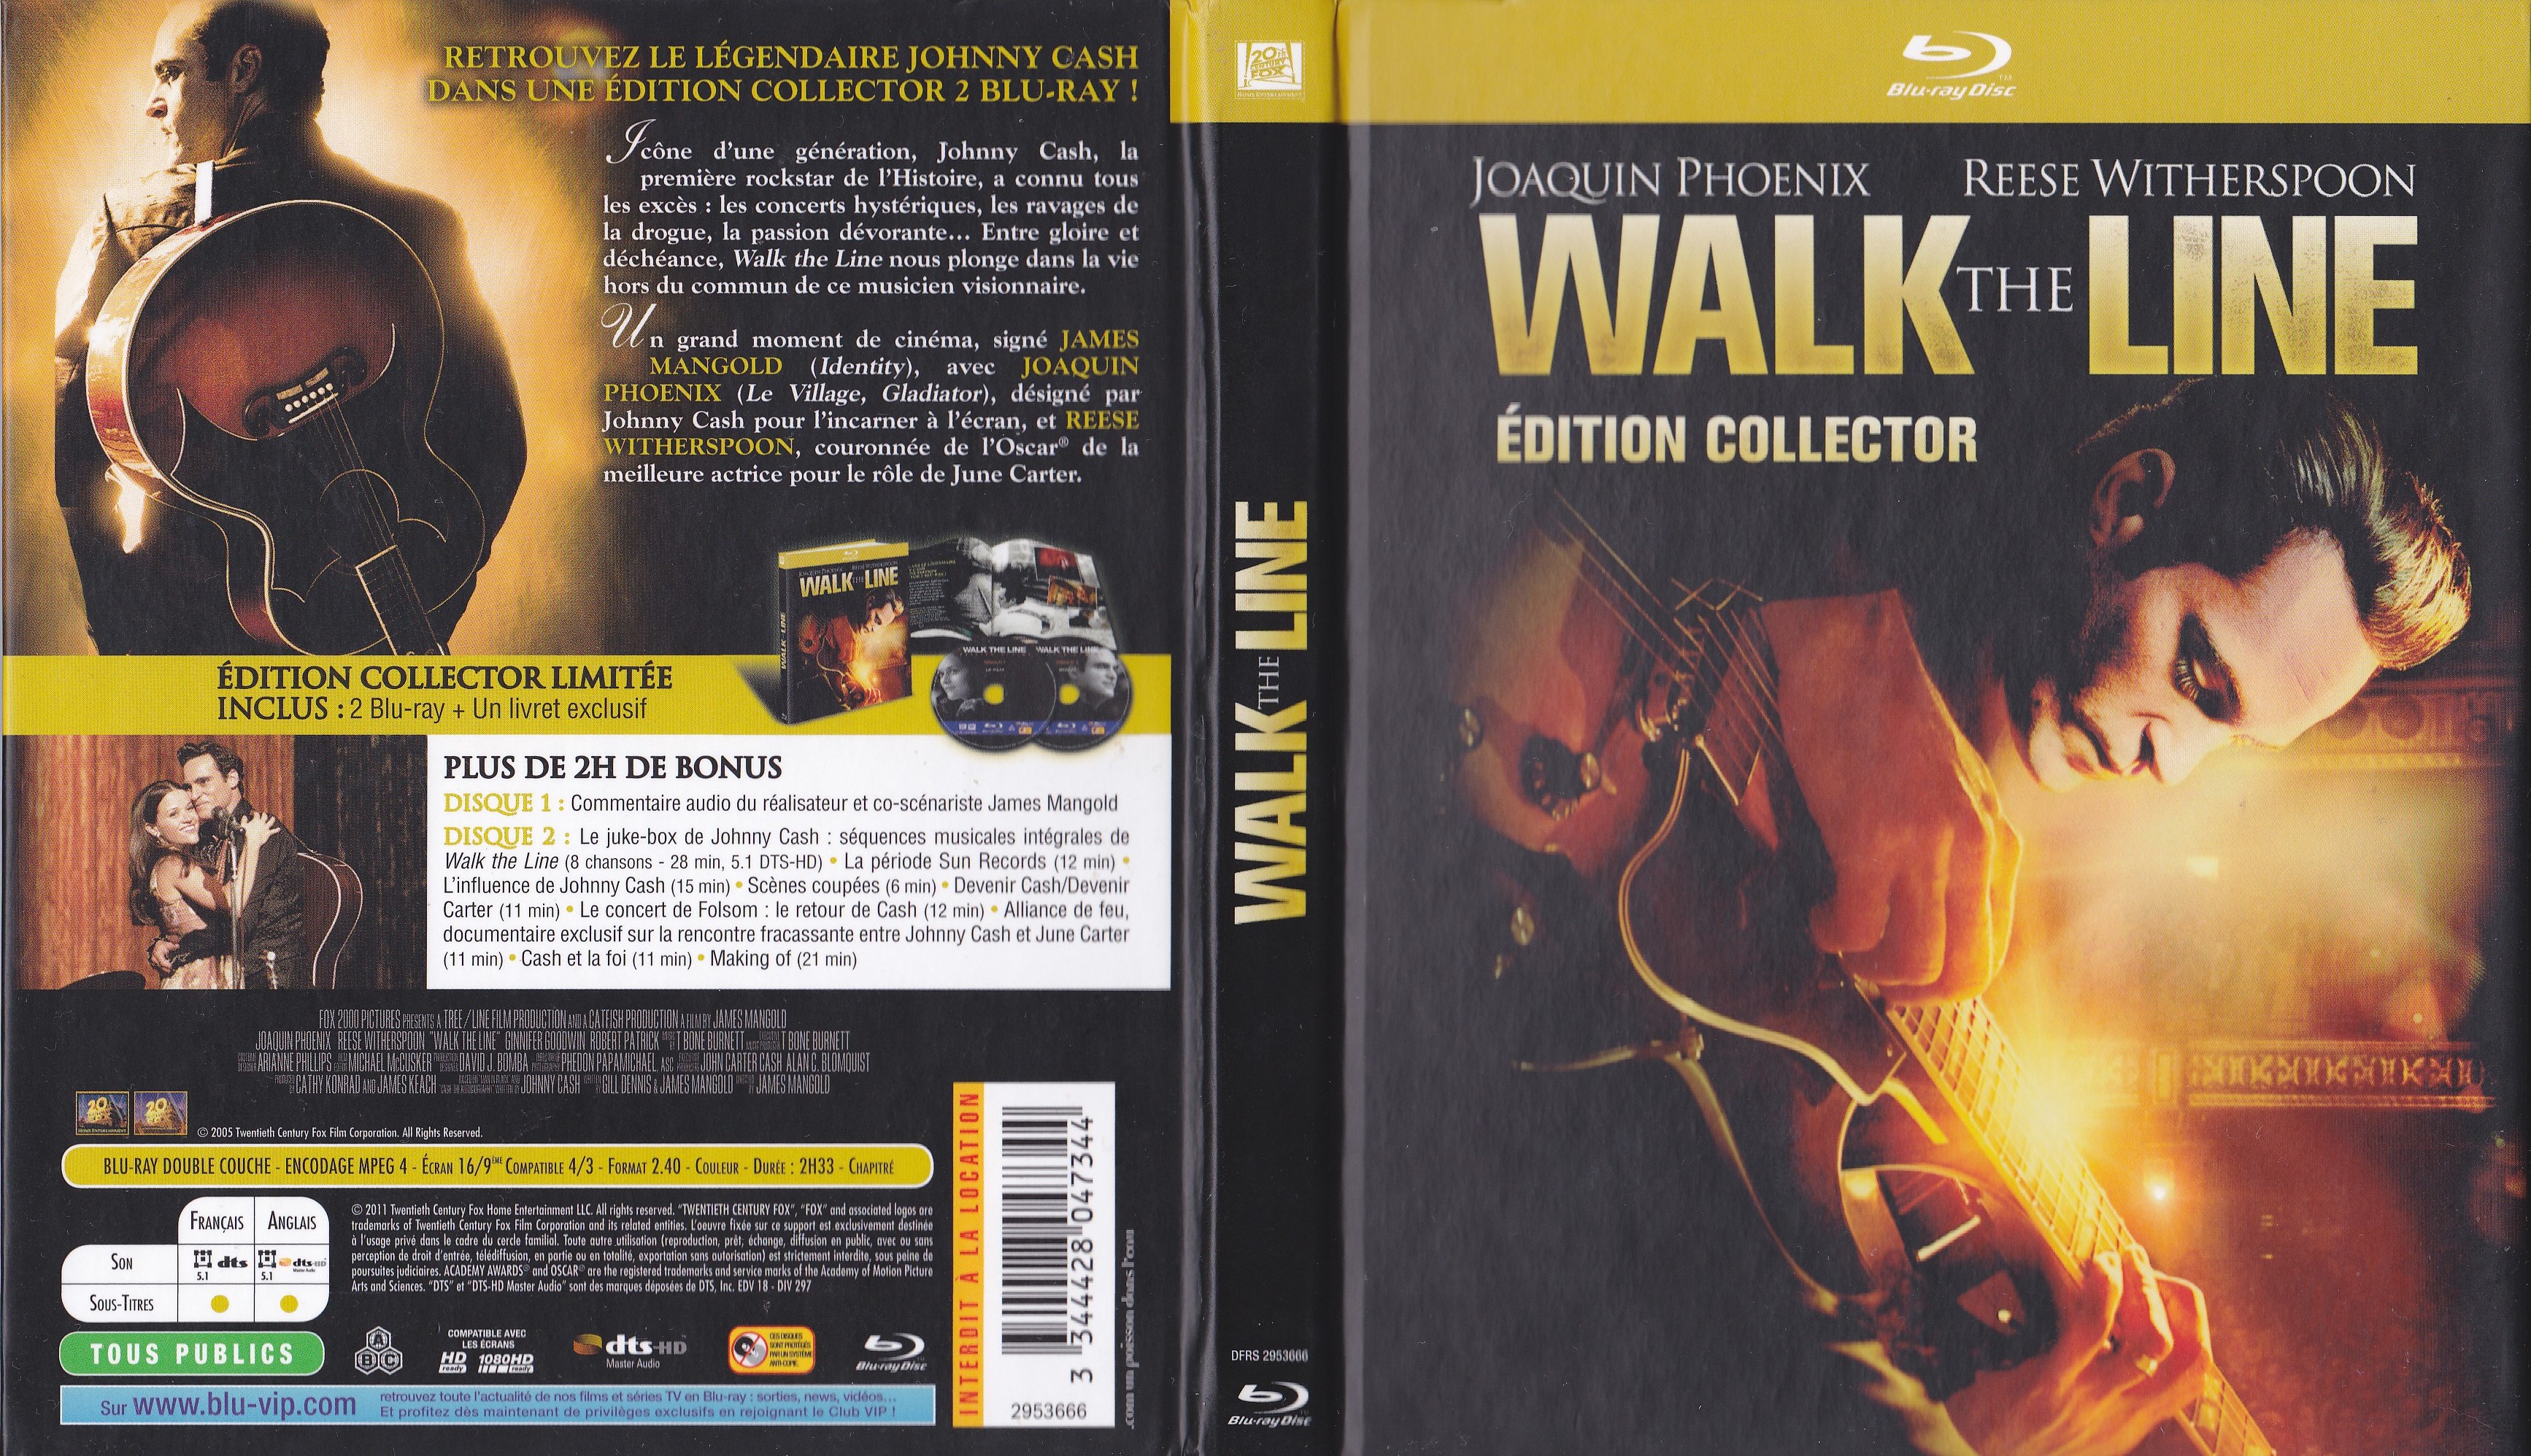 Jaquette DVD Walk the line (BLU-RAY)